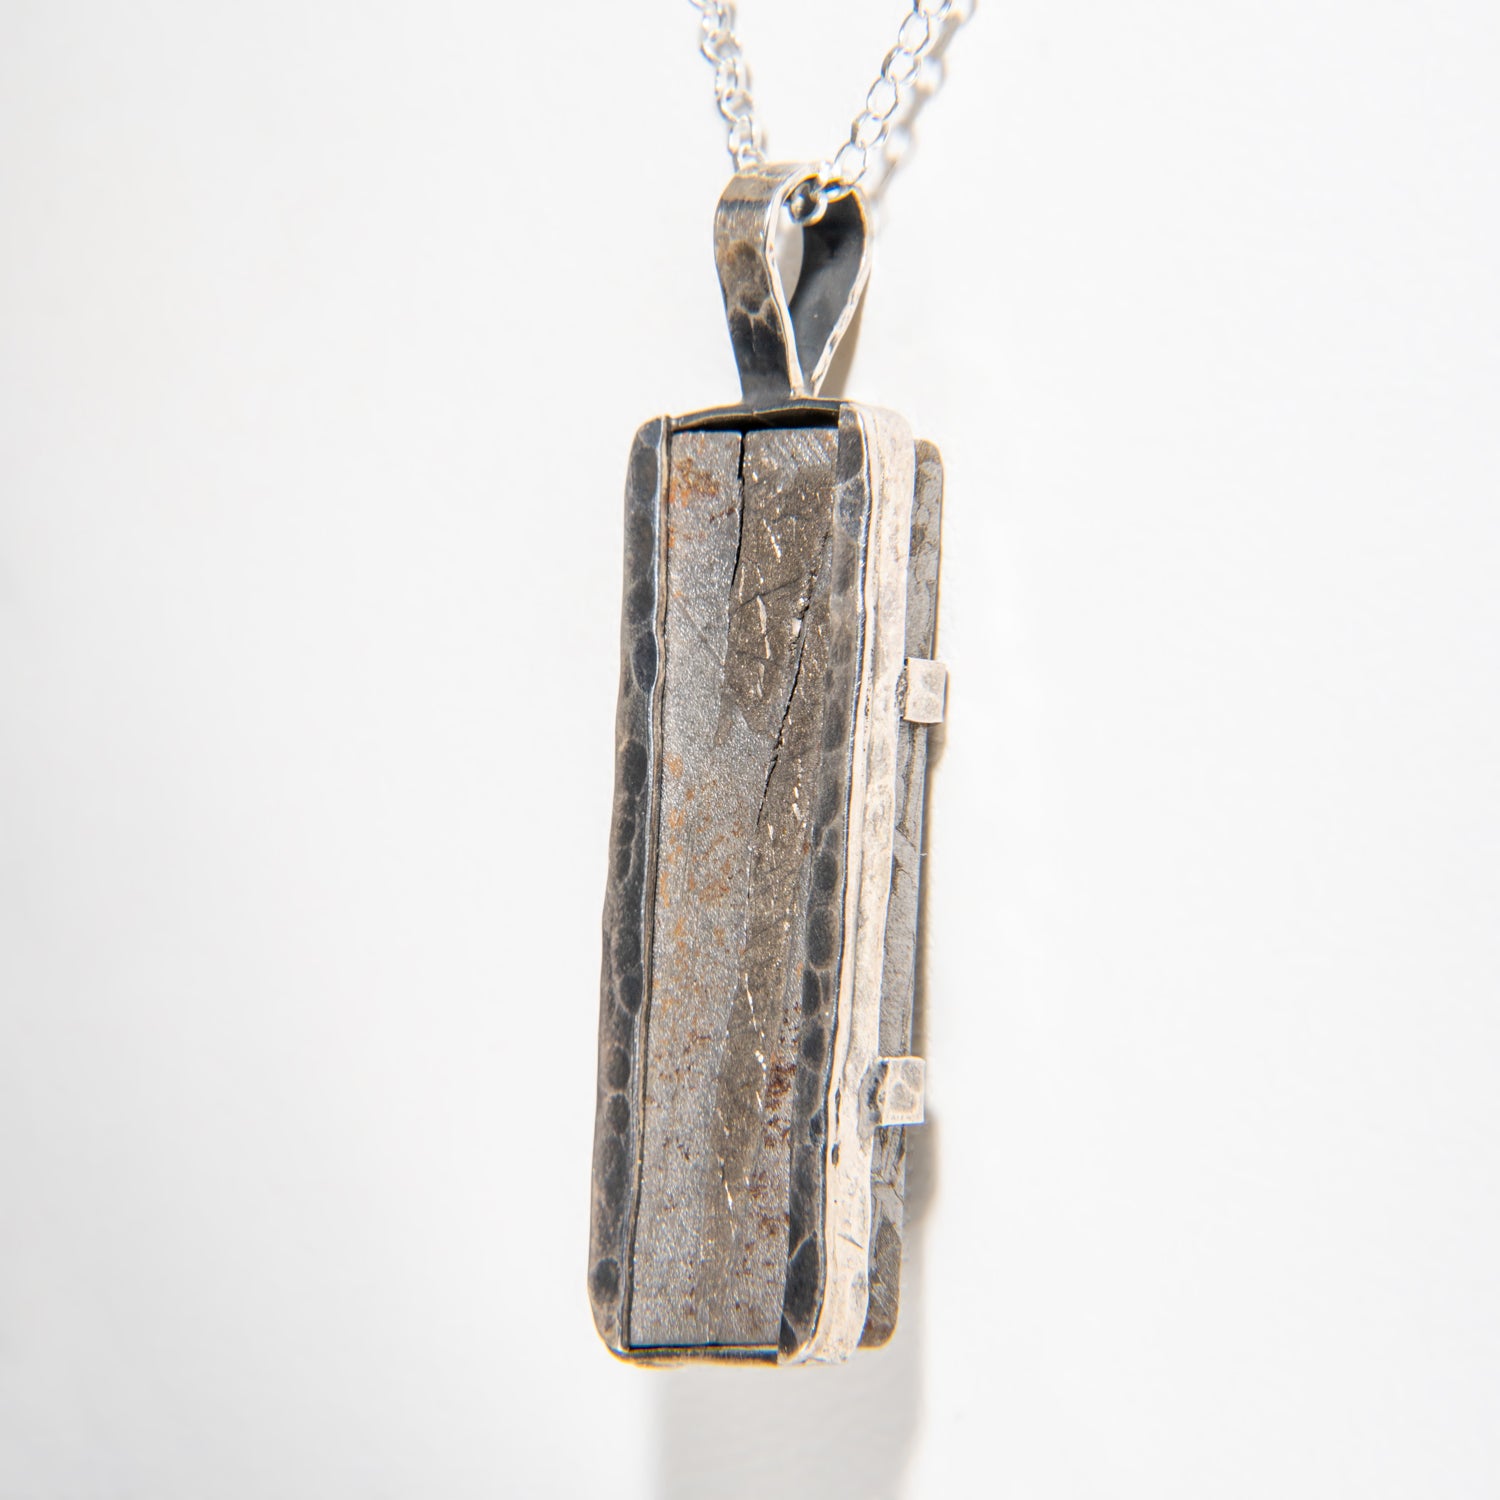 Polished Aletai Meteorite pendant (17 grams) with 18" Sterling Silver Chain